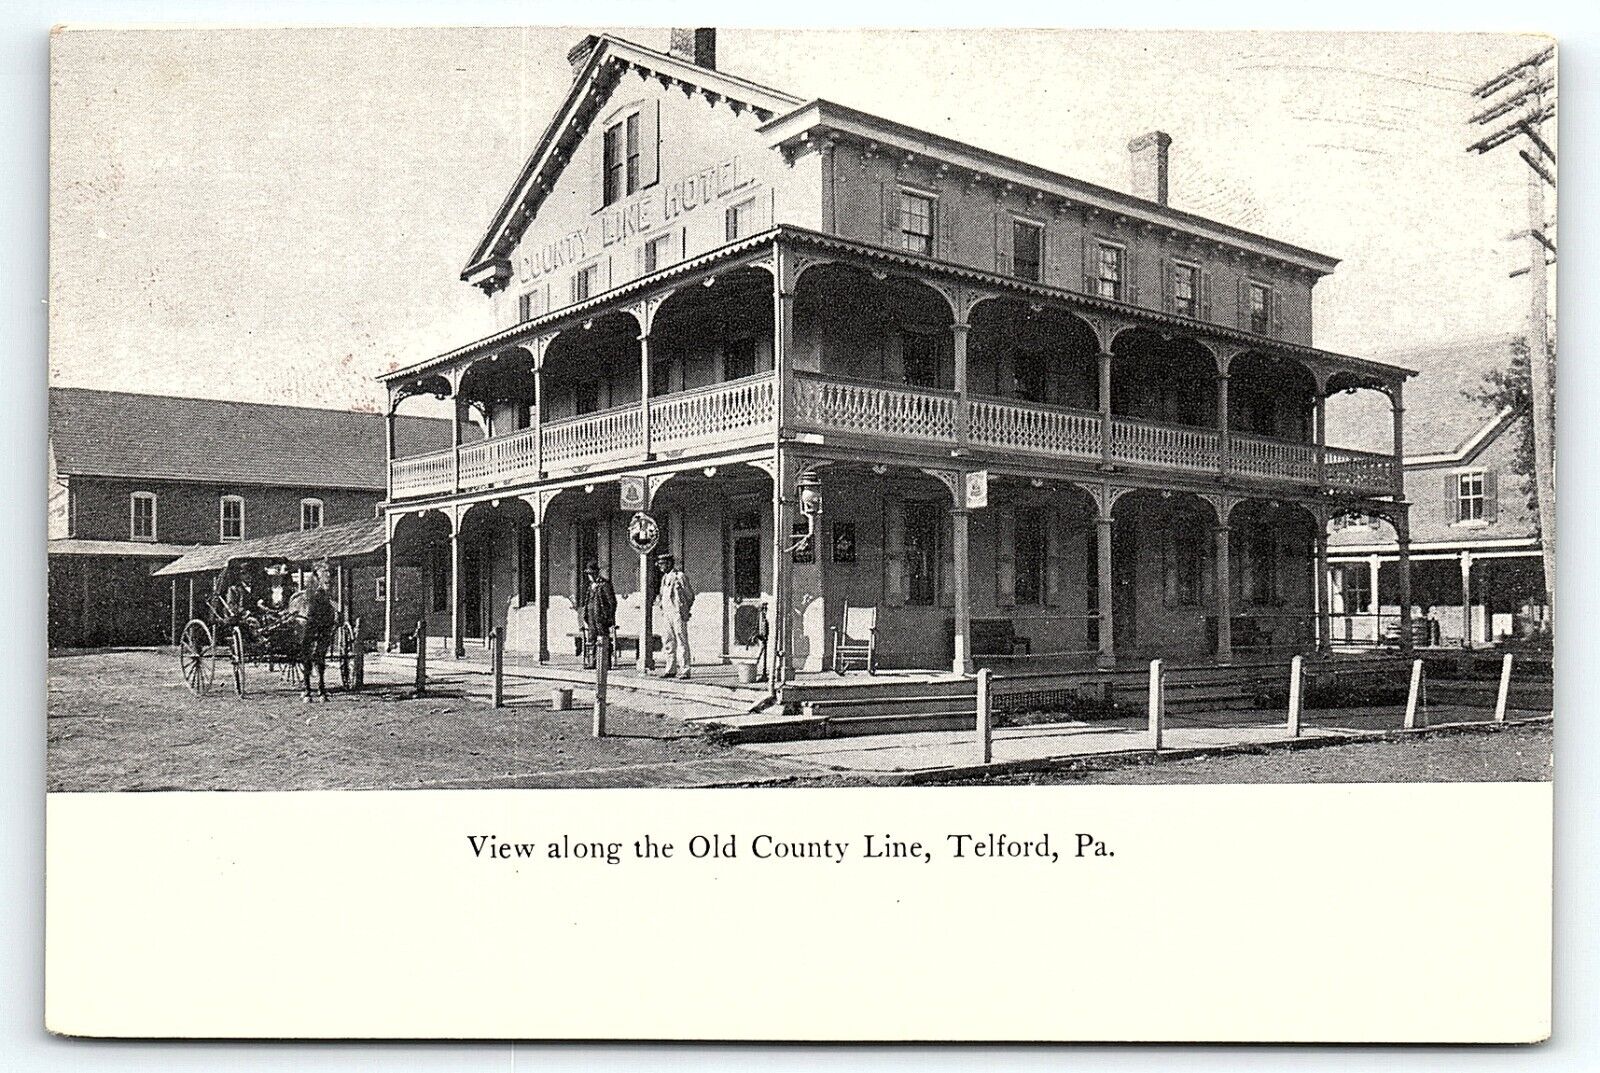 c1910 TELFORD PA COUNTY LINE HOTEL VIEW HORSE AND CARRIAGE EARLY POSTCARD P4085